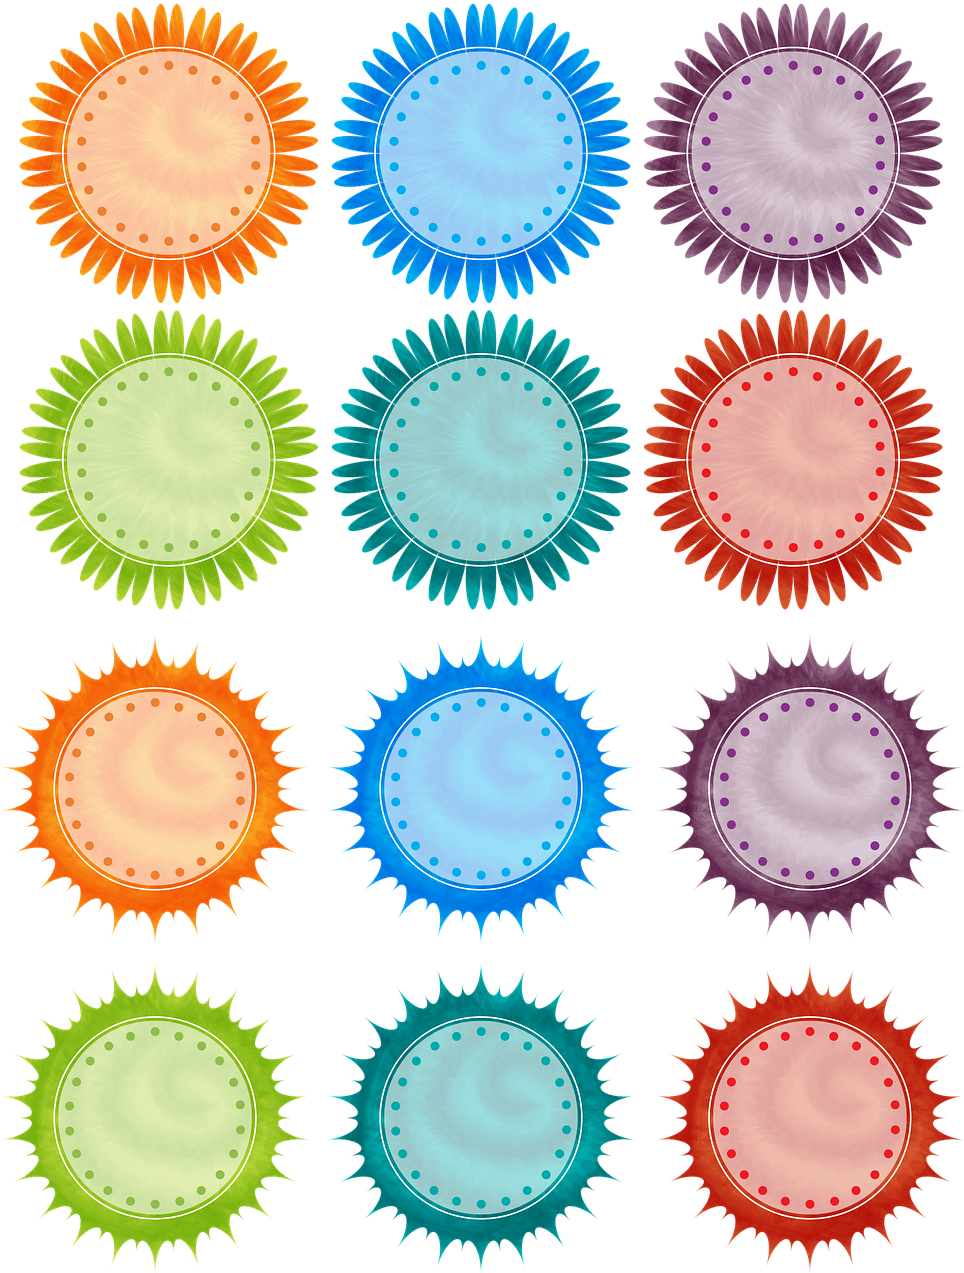 A Group Of Colorful Circular Shapes